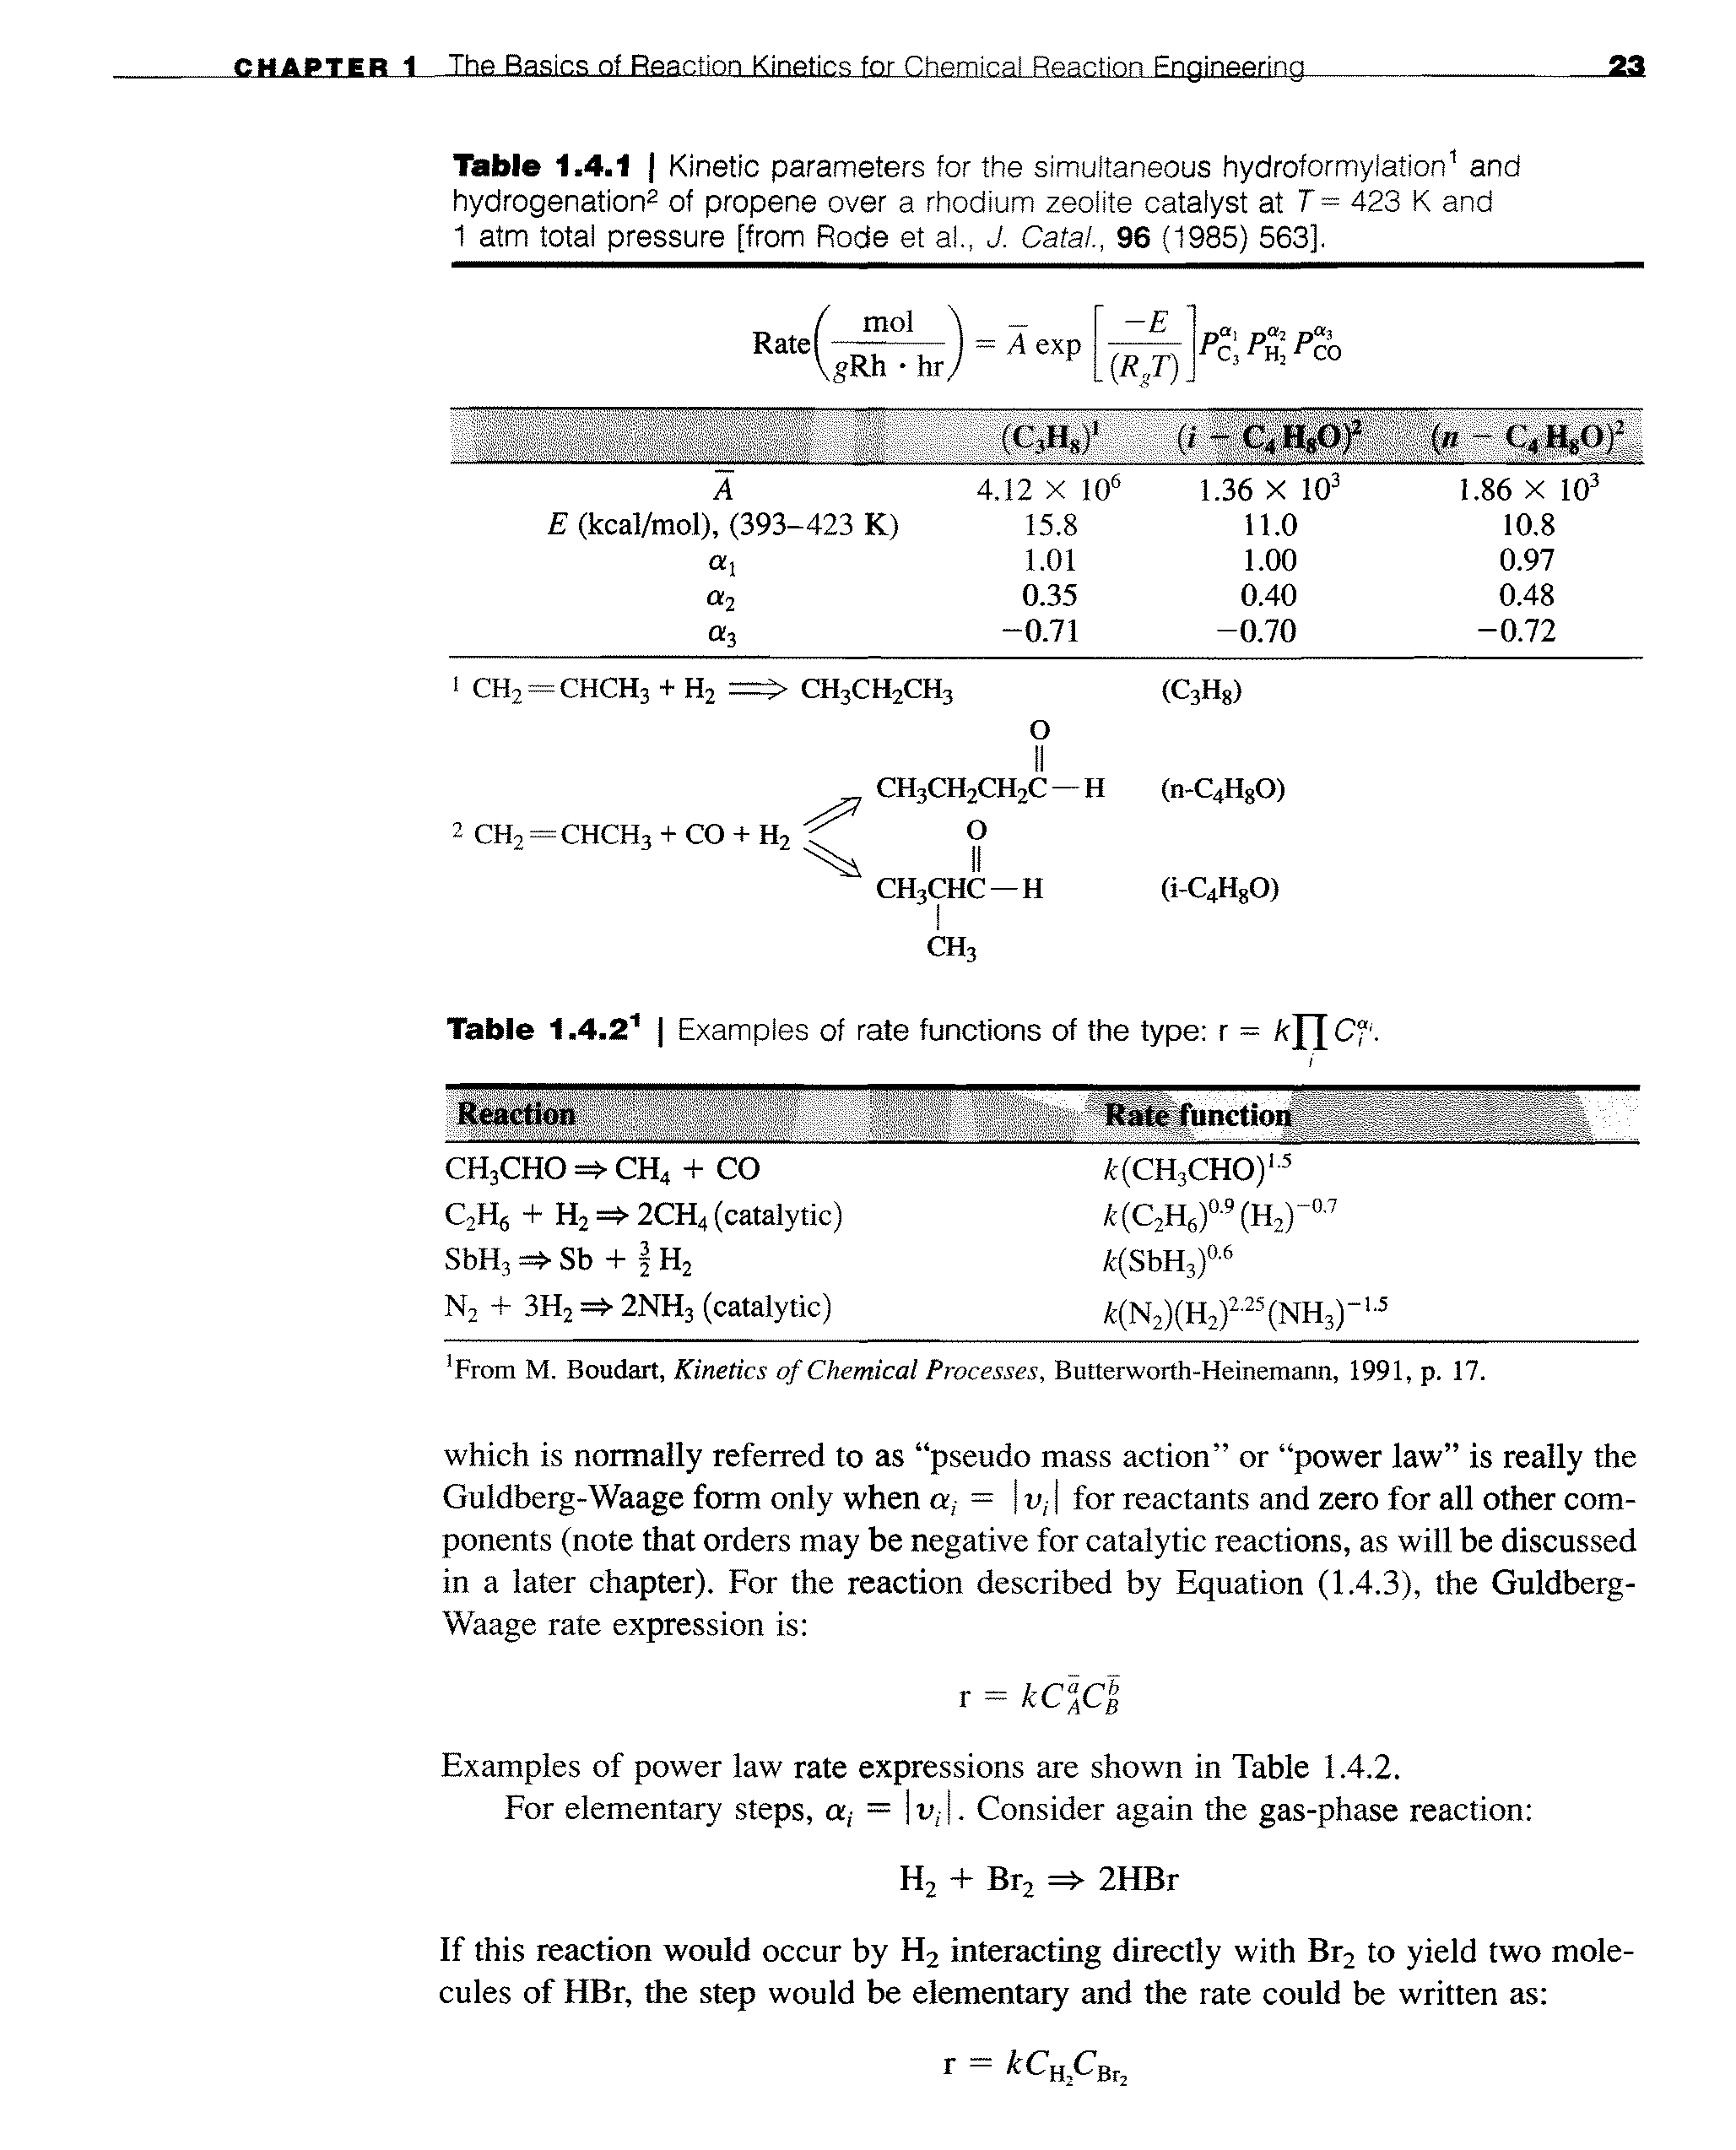 Table 1.4.1 Kinetic parameters for the simultaneous hydroformylation and hydrogenation of propene over a rhodium zeolite catalyst at 7" = 423 K and 1 atm total pressure [from Rode et al., J. Catal., 96 (1985) 563].